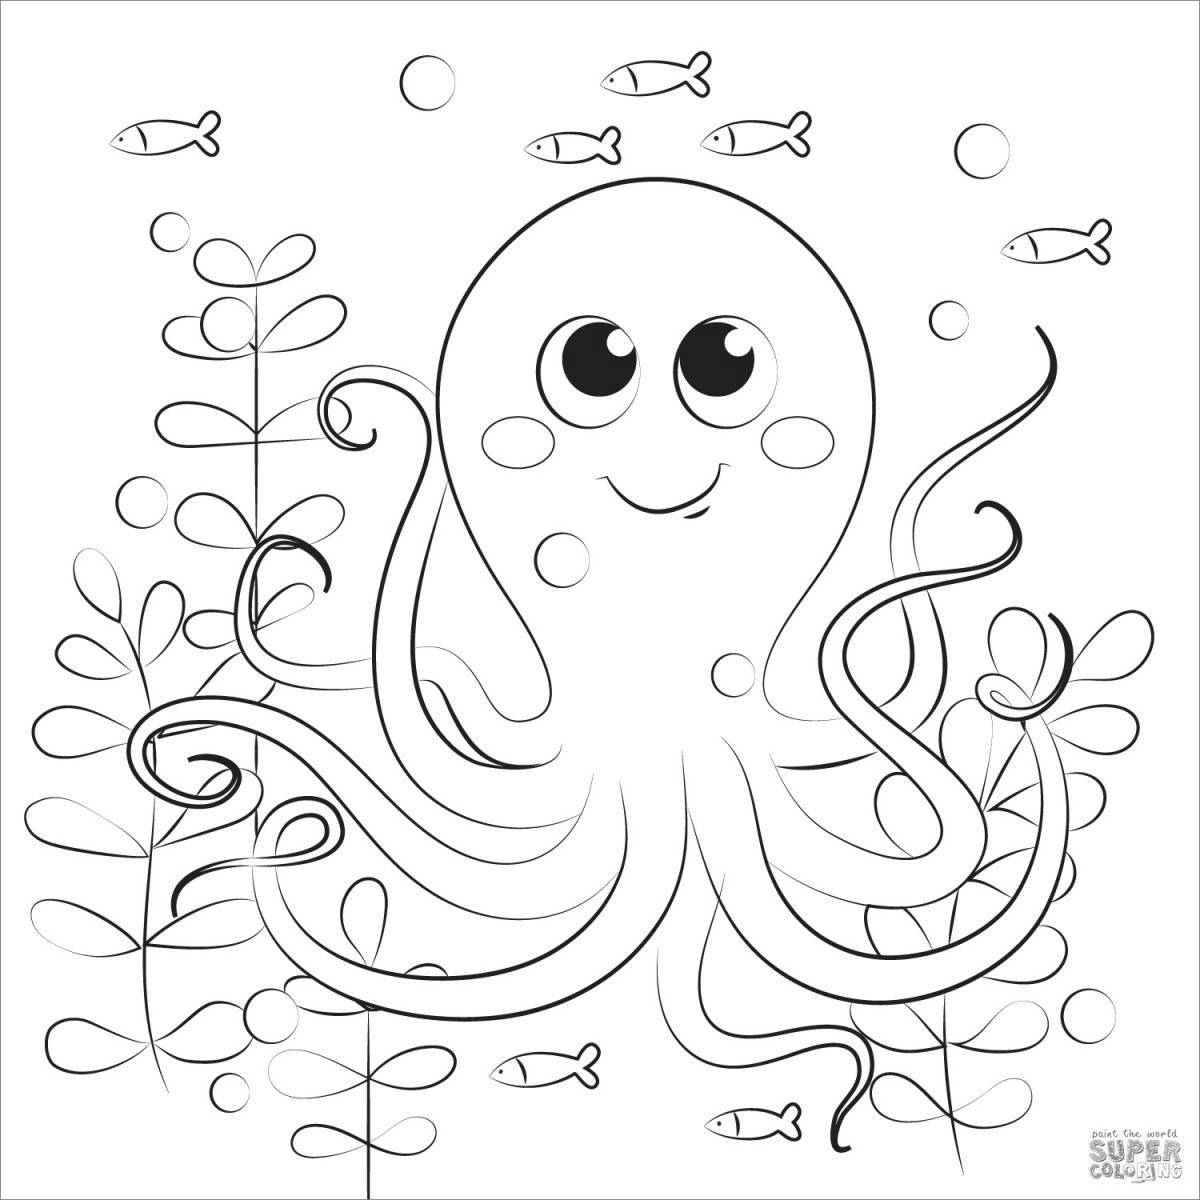 Incredible octopus coloring book for kids